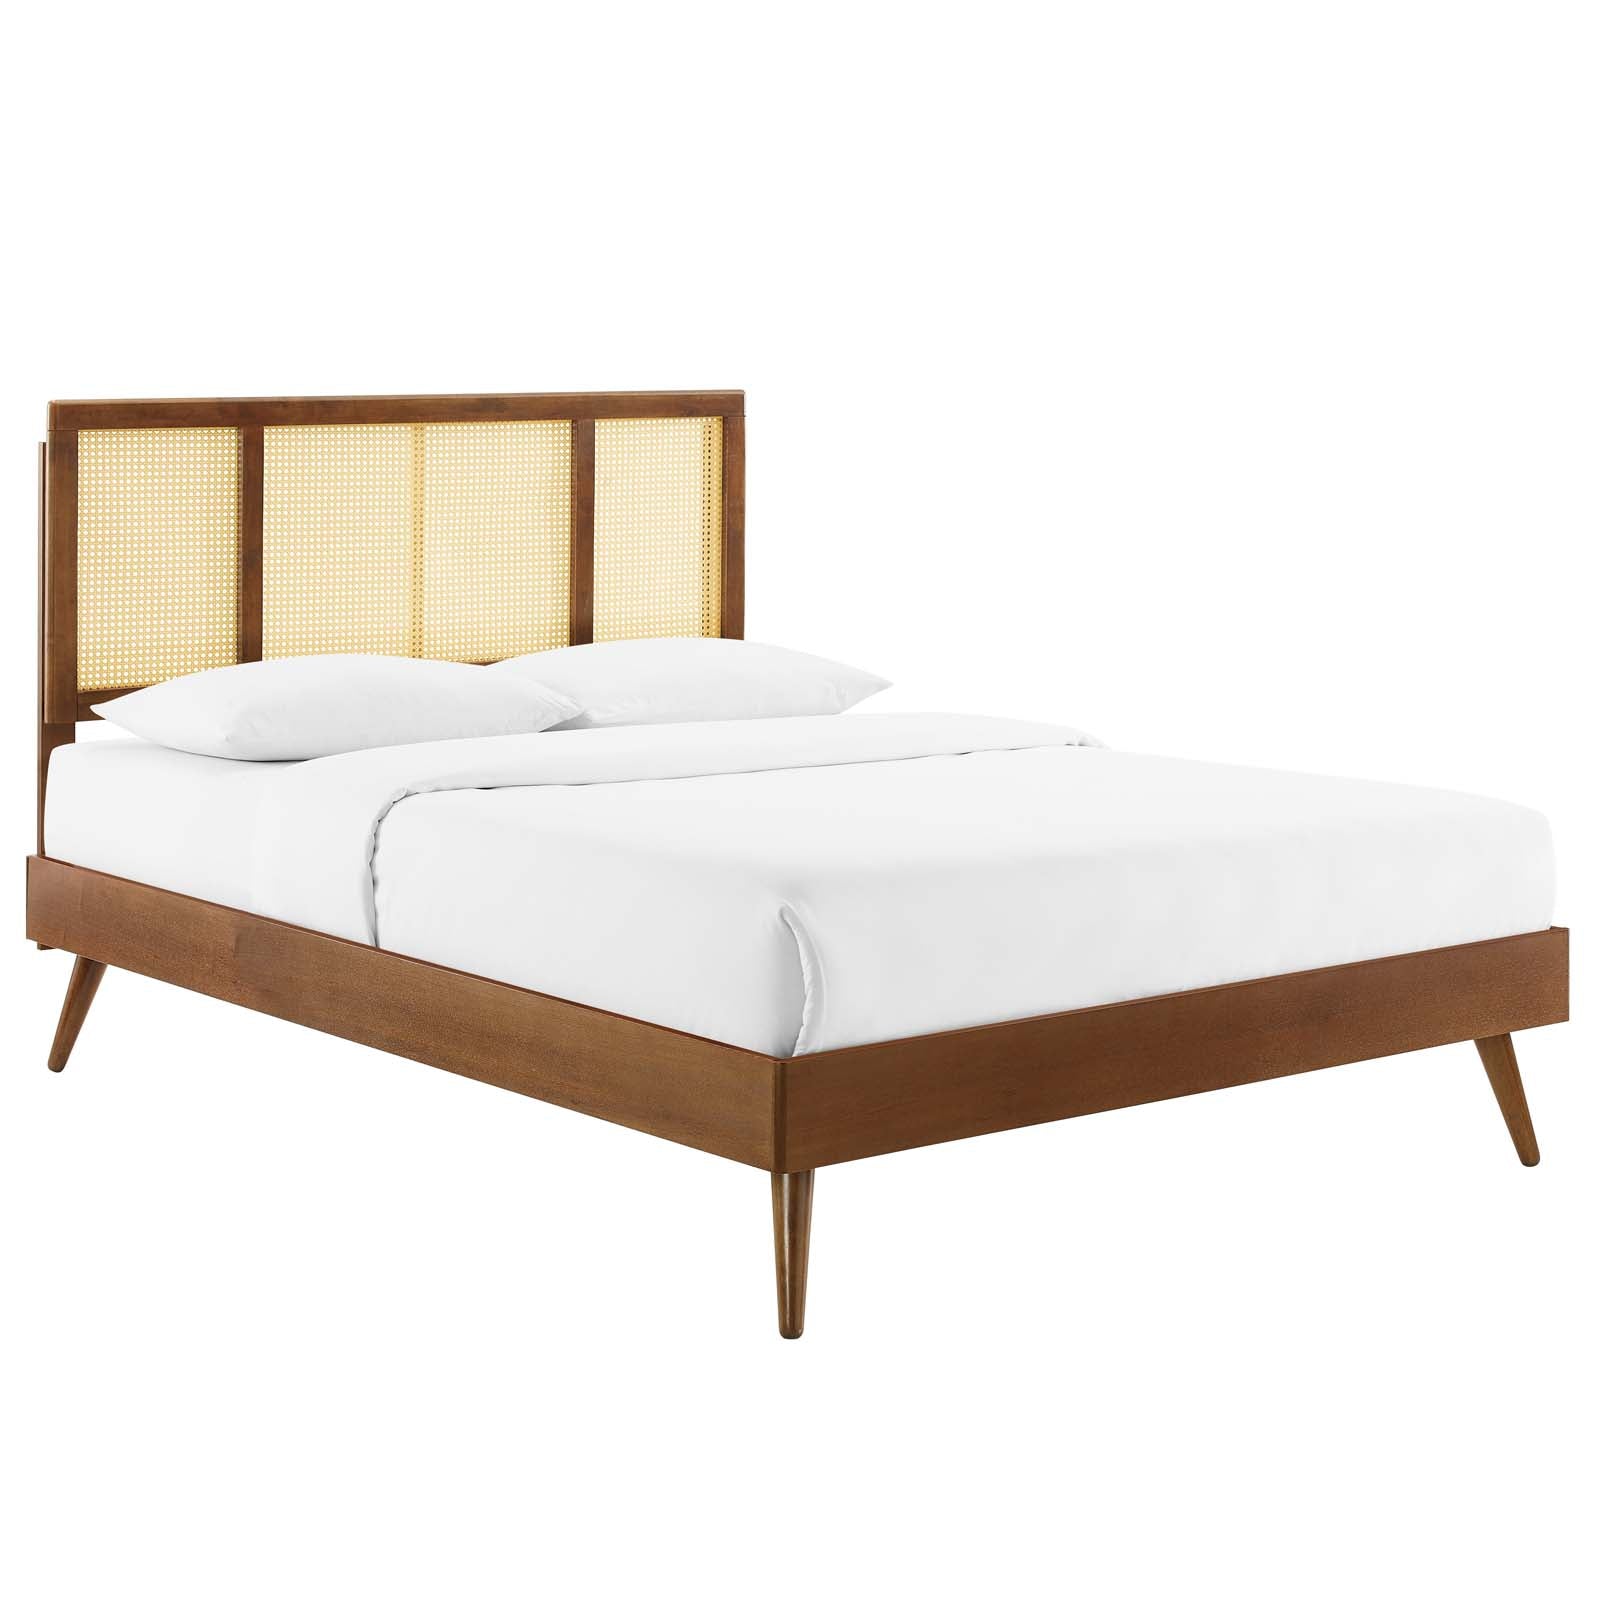 Modway Beds - Kelsea-Cane-and-Wood-Full-Platform-Bed-With-Splayed-Legs-Walnut